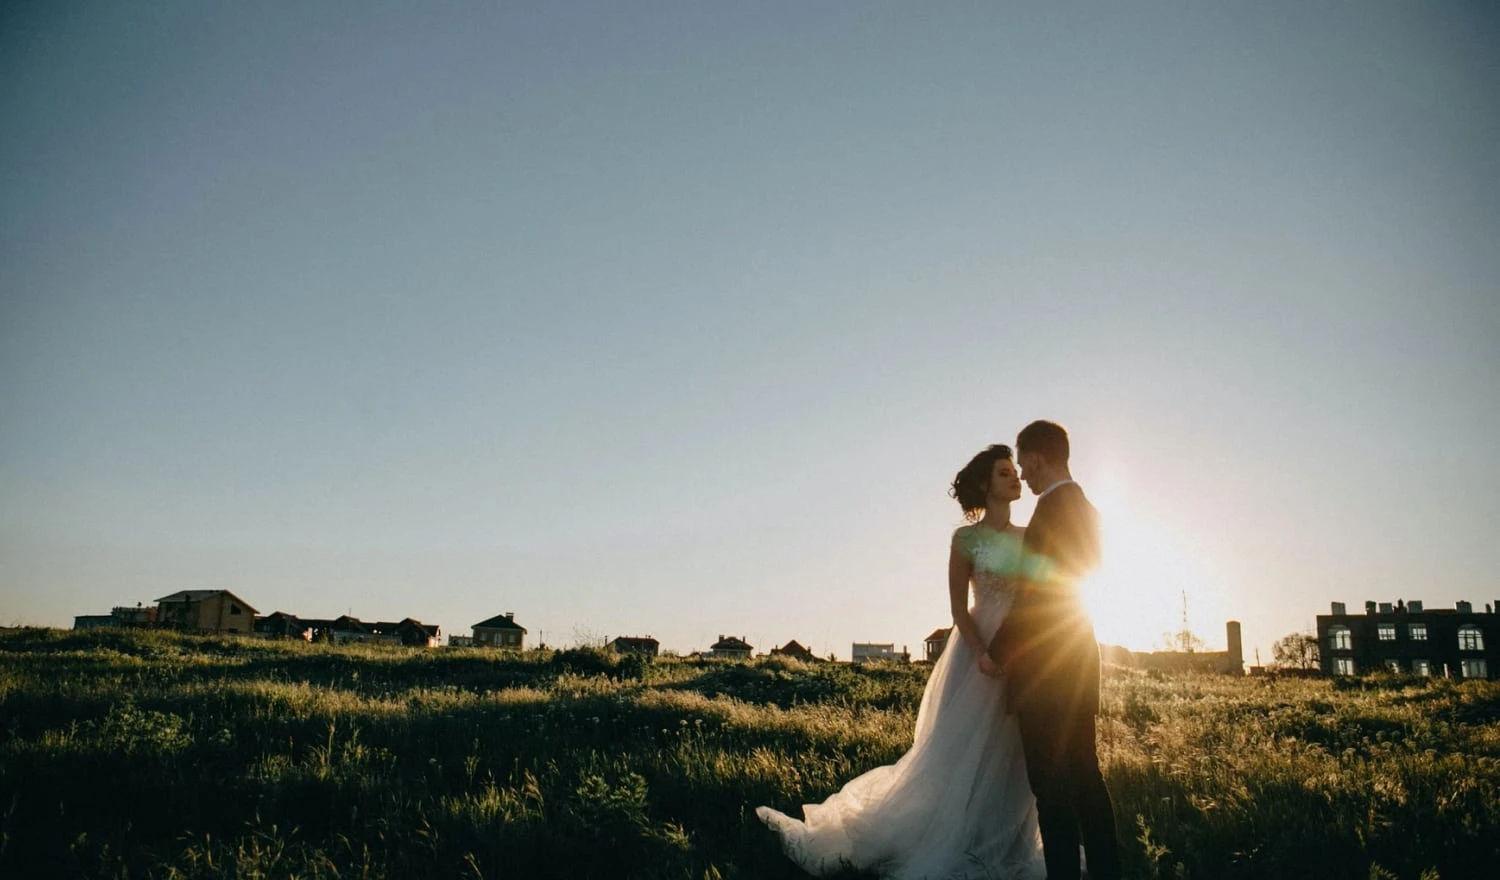 Newlyweds standing on a grassy hill